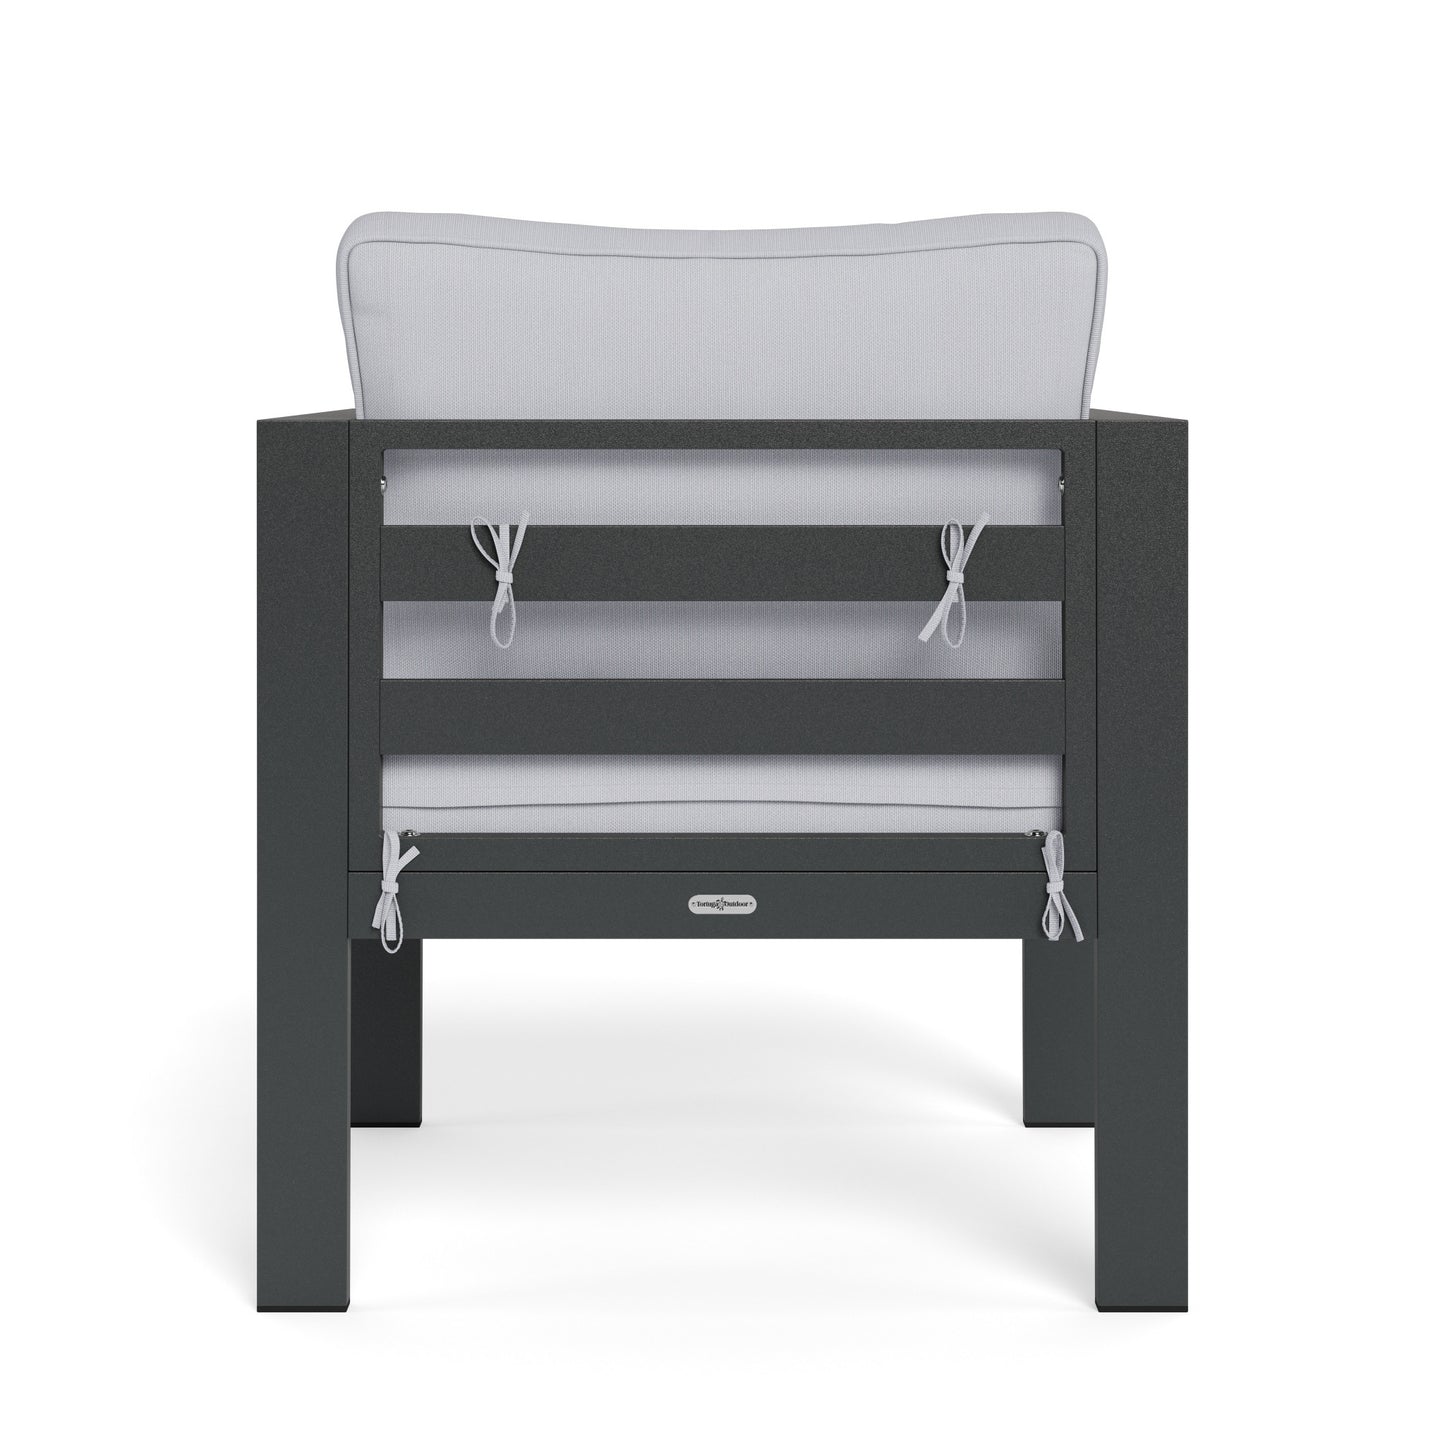 Lakeview, 3-Pc Seat Set, Chair/Chair/side table - Grey/Grey